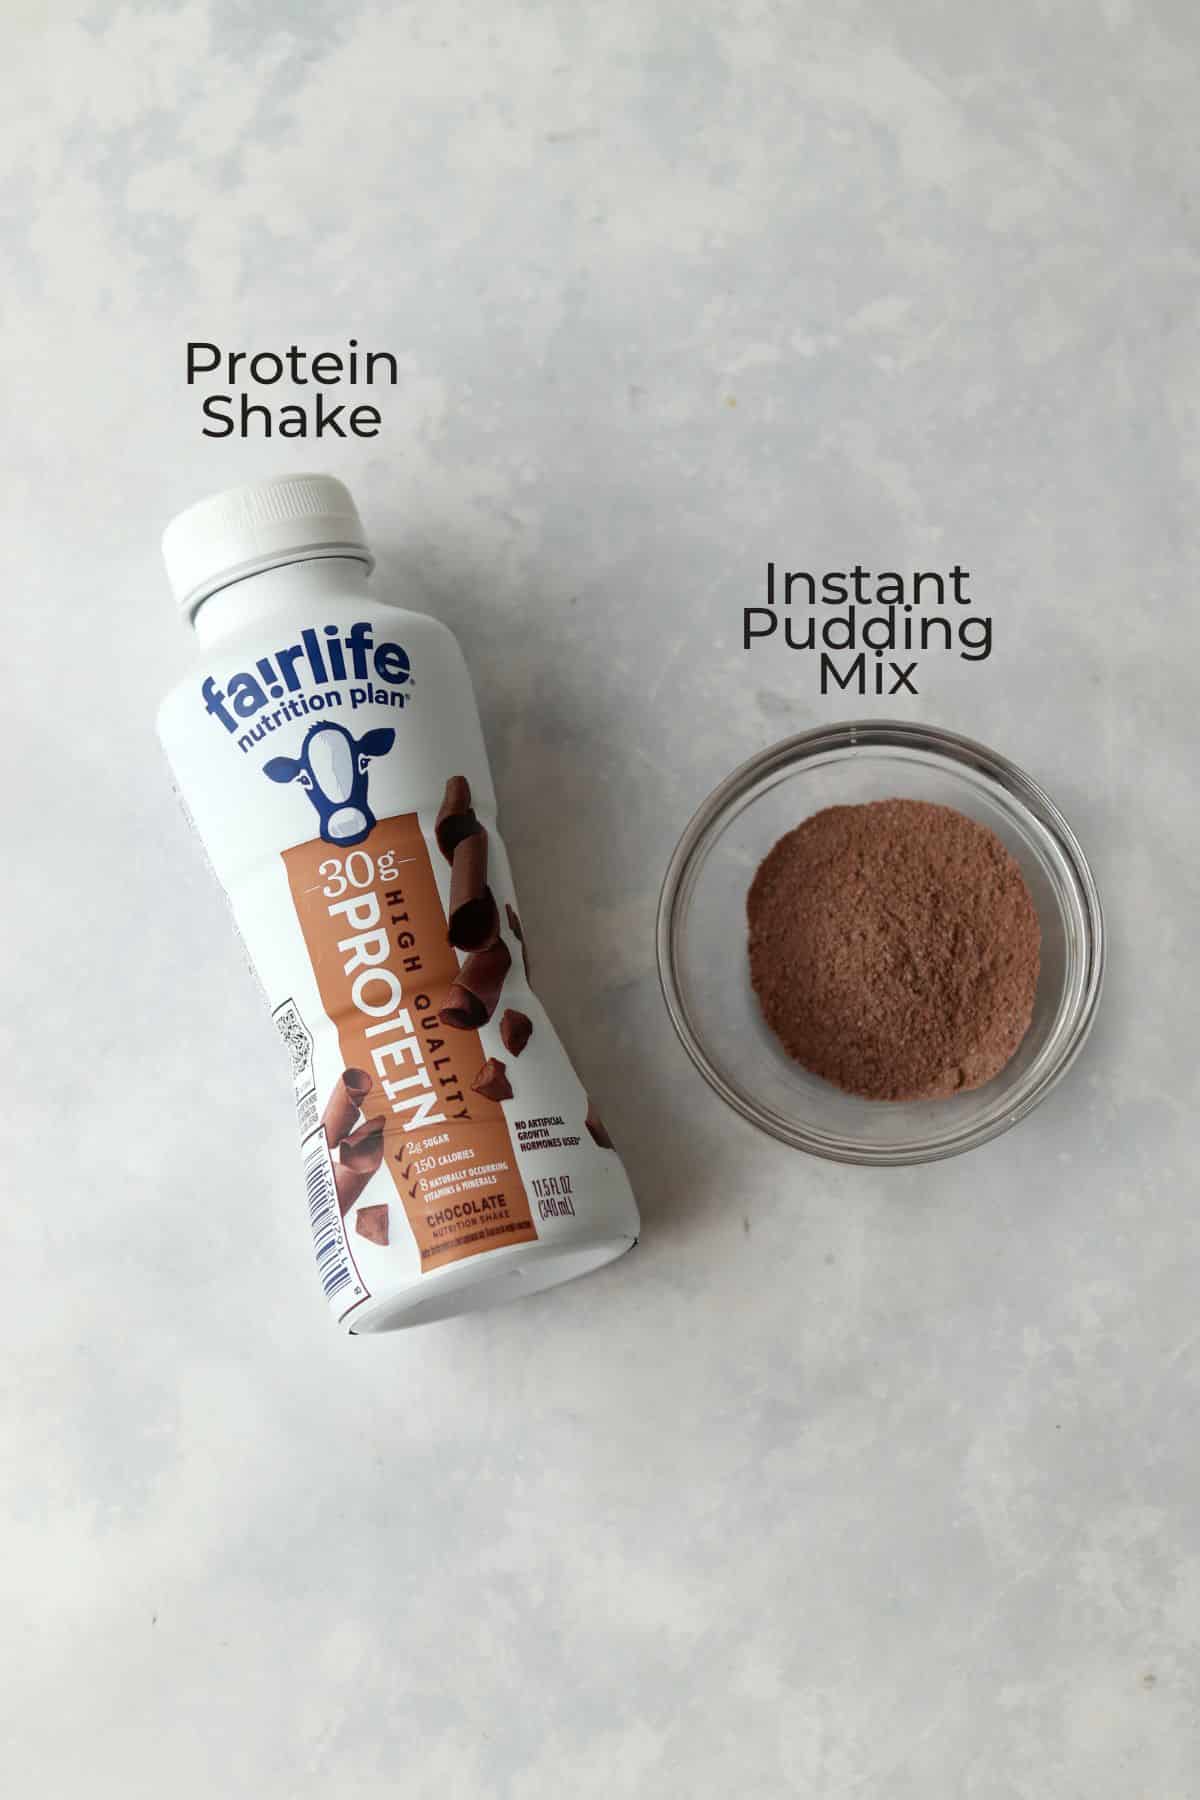 Fairlife protein shake and instant pudding mix